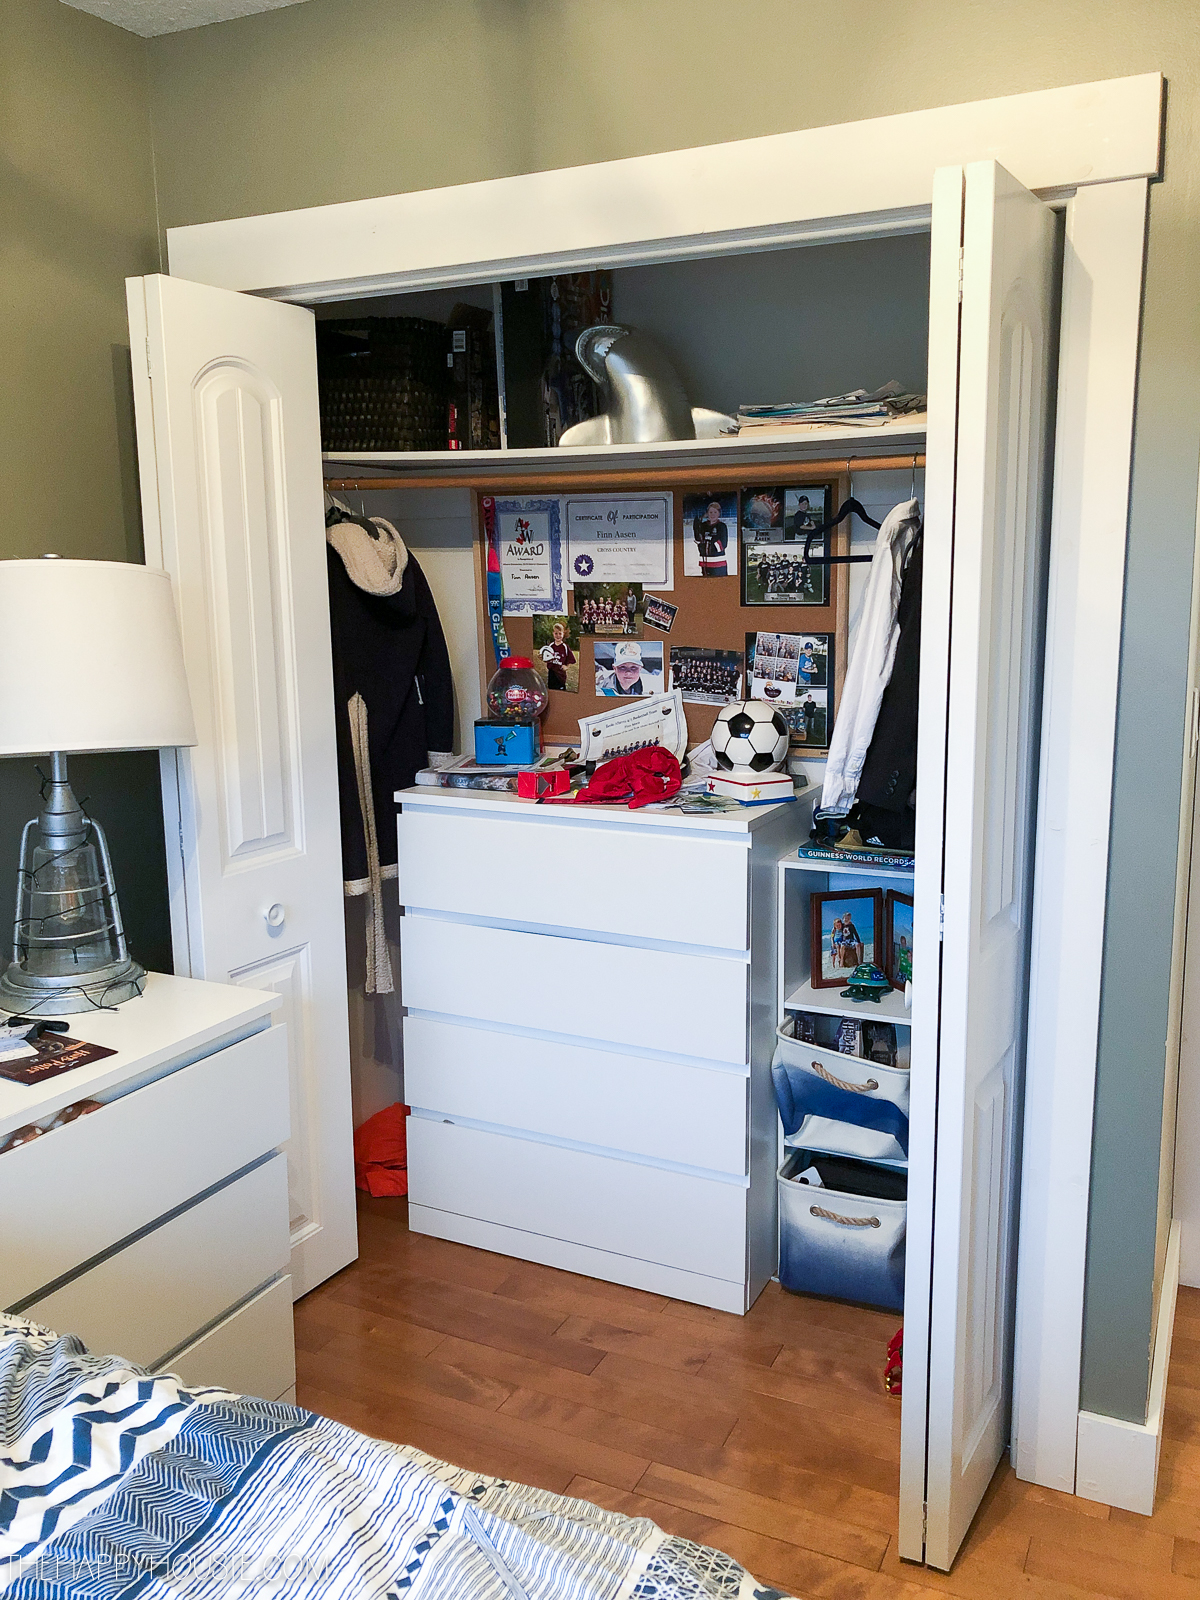 The closet doors are open revealing a chest of drawers and sports items.